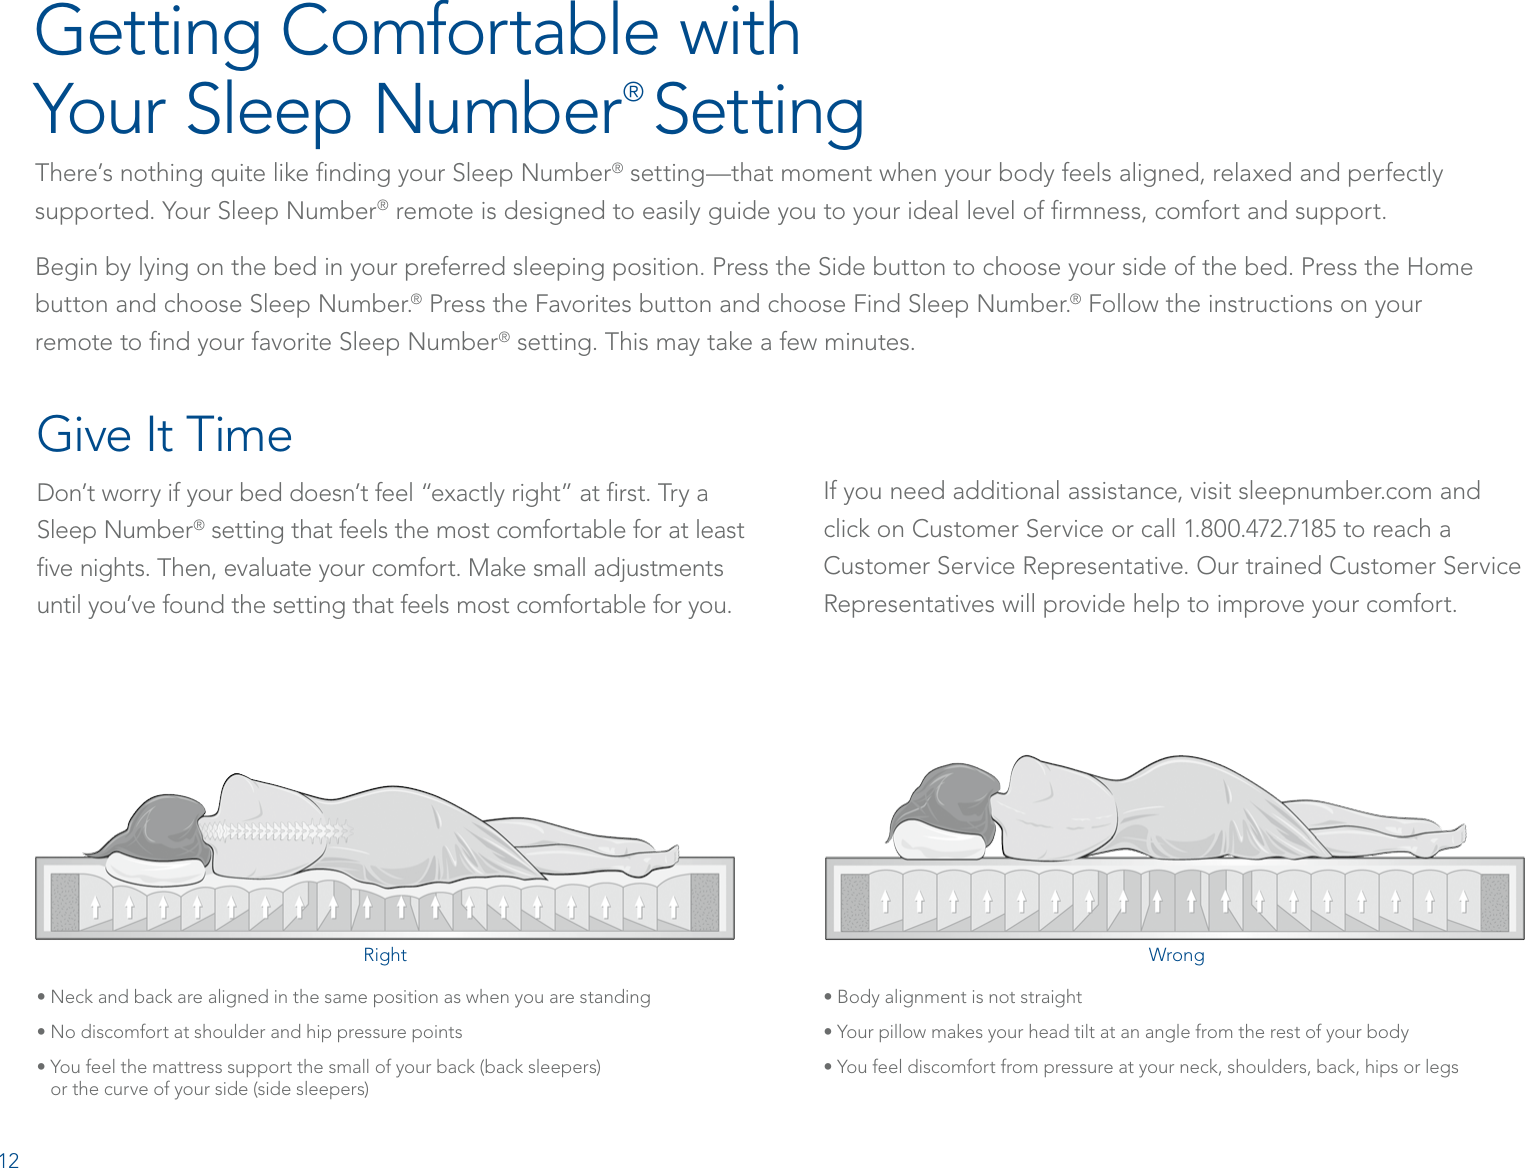 Give It TimeDon’t worry if your bed doesn’t feel “exactly right” at ﬁrst. Try a Sleep Number® setting that feels the most comfortable for at least ﬁve nights. Then, evaluate your comfort. Make small adjustments until you’ve found the setting that feels most comfortable for you.If you need additional assistance, visit sleepnumber.com and click on Customer Service or call 1.800.472.7185 to reach a Customer Service Representative. Our trained Customer Service Representatives will provide help to improve your comfort.Getting Comfortable with Your Sleep Number® SettingThere’s nothing quite like ﬁnding your Sleep Number® setting—that moment when your body feels aligned, relaxed and perfectly supported. Your Sleep Number® remote is designed to easily guide you to your ideal level of ﬁrmness, comfort and support. Begin by lying on the bed in your preferred sleeping position. Press the Side button to choose your side of the bed. Press the Home button and choose Sleep Number.® Press the Favorites button and choose Find Sleep Number.® Follow the instructions on your remote to ﬁnd your favorite Sleep Number® setting. This may take a few minutes.• Body alignment is not straight• Your pillow makes your head tilt at an angle from the rest of your body• You feel discomfort from pressure at your neck, shoulders, back, hips or legs• Neck and back are aligned in the same position as when you are standing• No discomfort at shoulder and hip pressure points•  You feel the mattress support the small of your back (back sleepers)  or the curve of your side (side sleepers)Right Wrong12